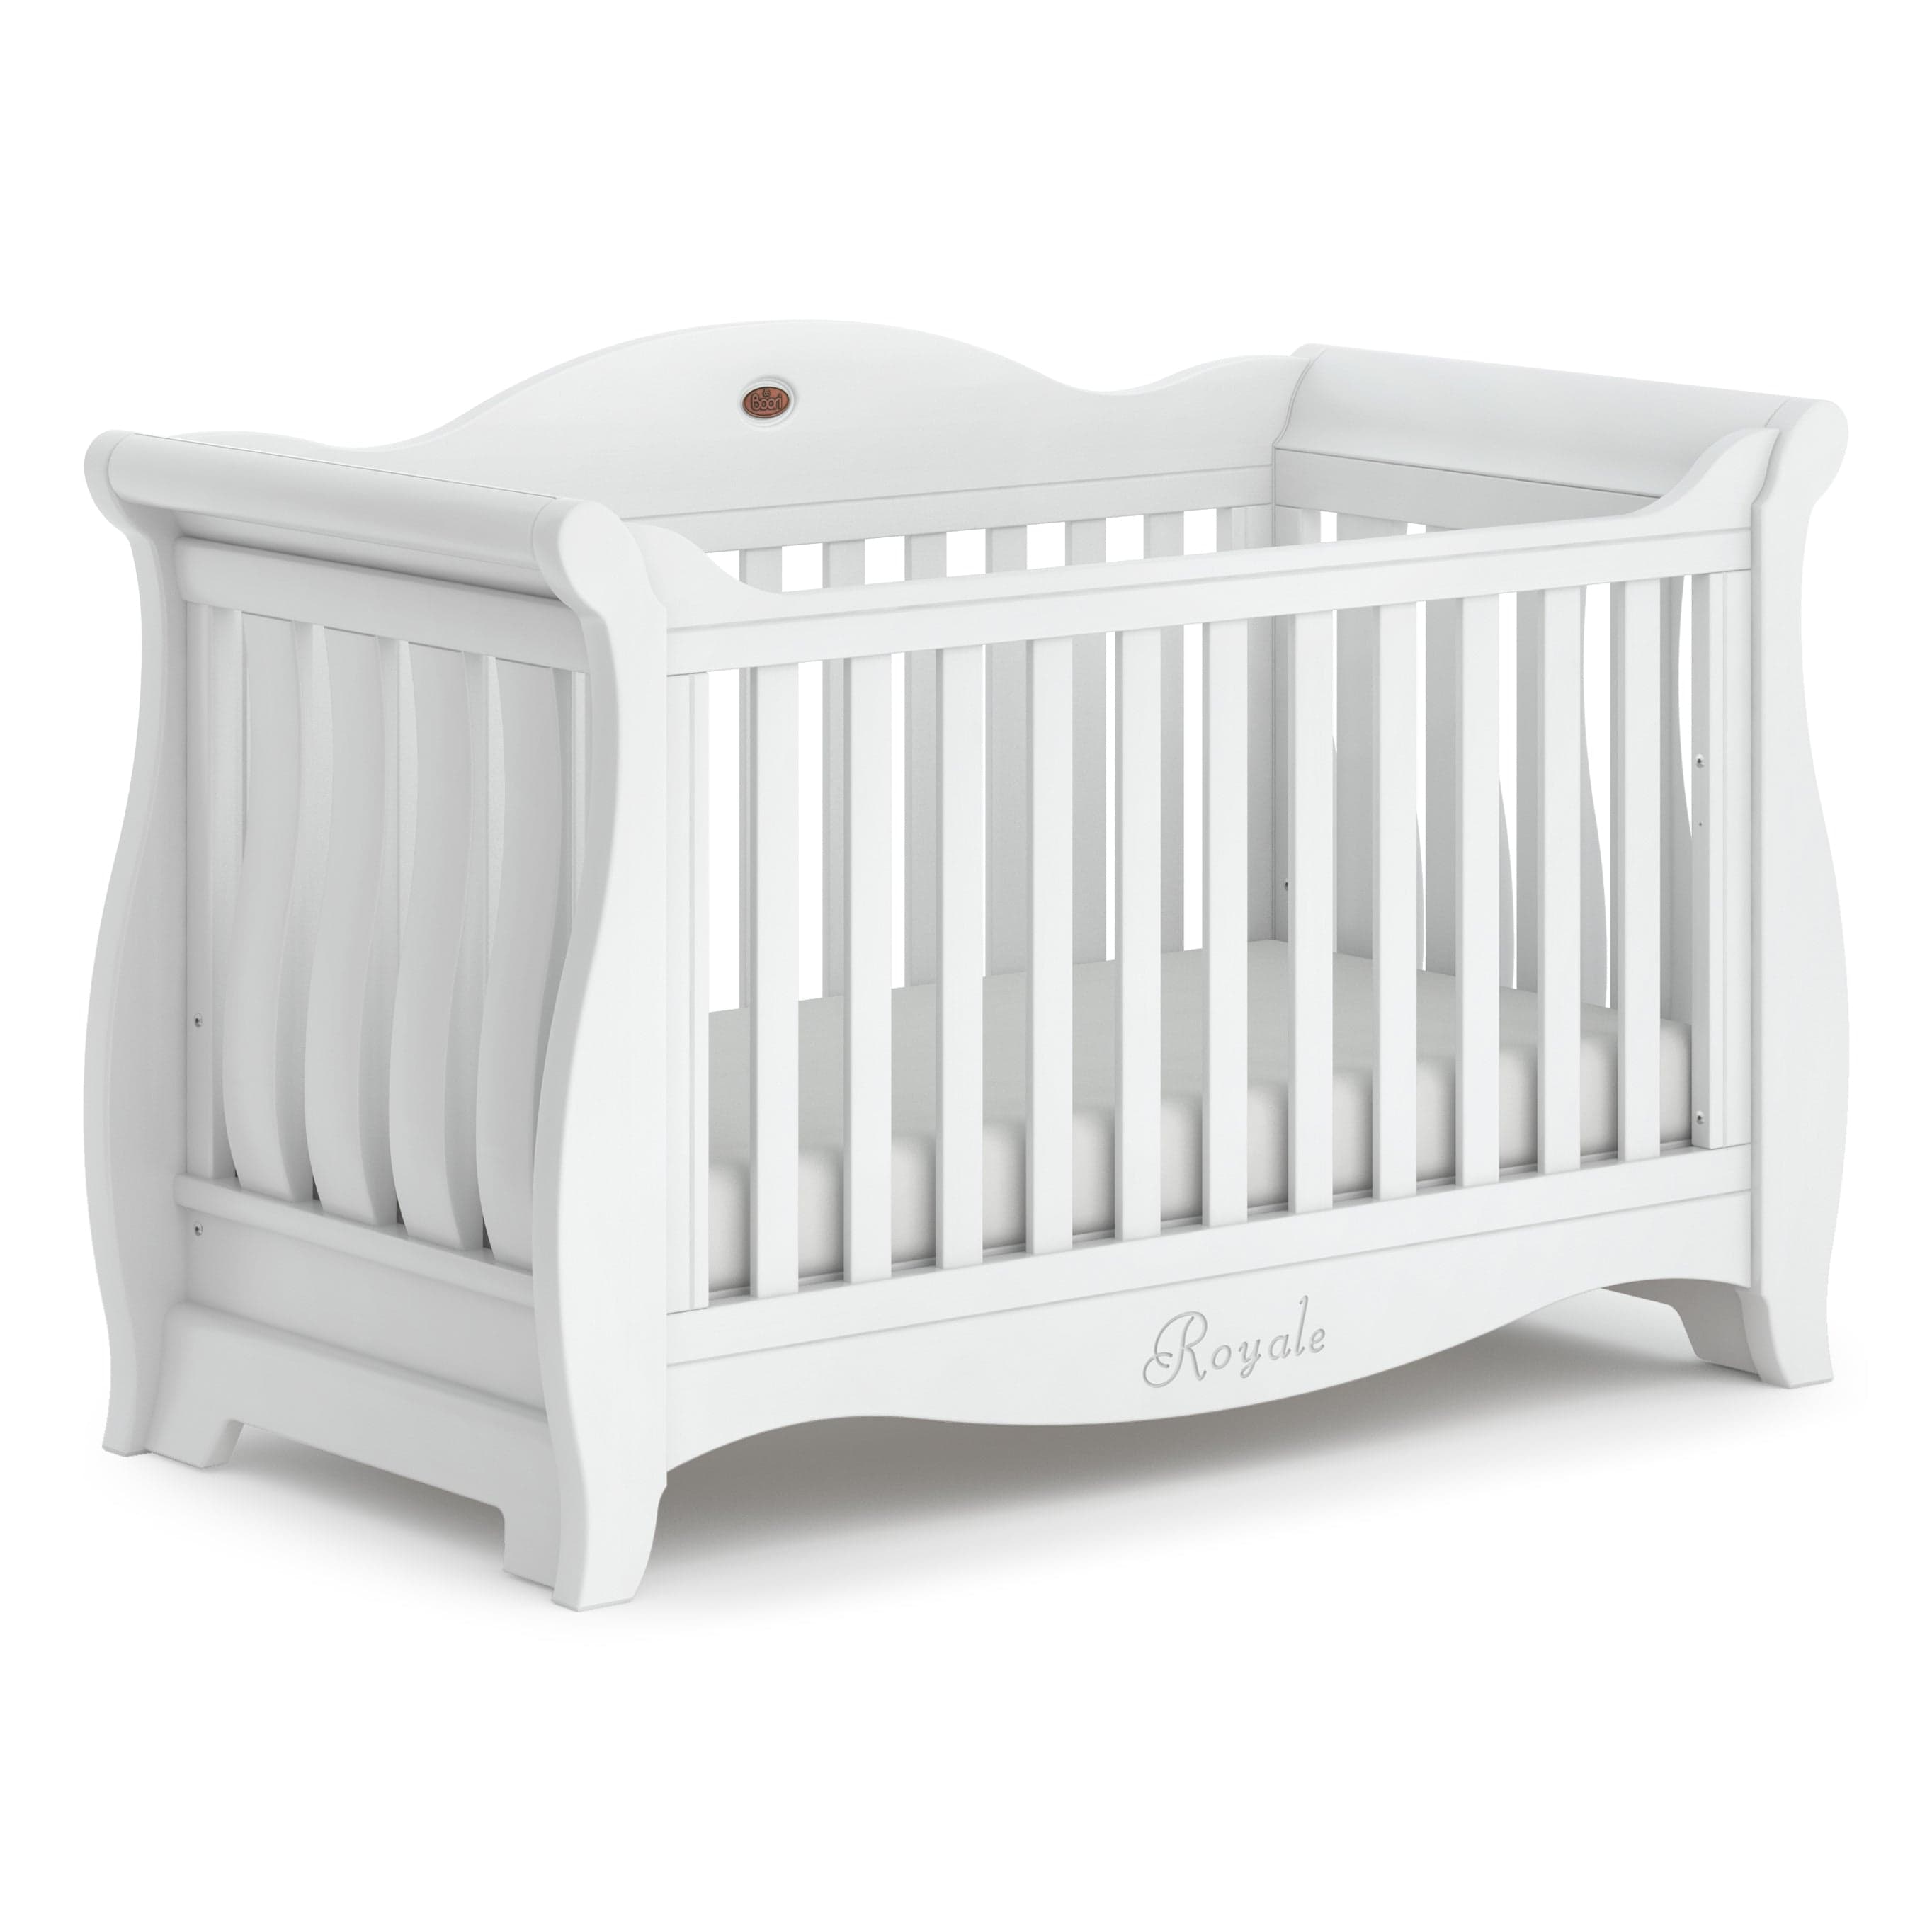 Boori Sleigh Royale 2 Piece Roomset Barley White Boori Roomsets